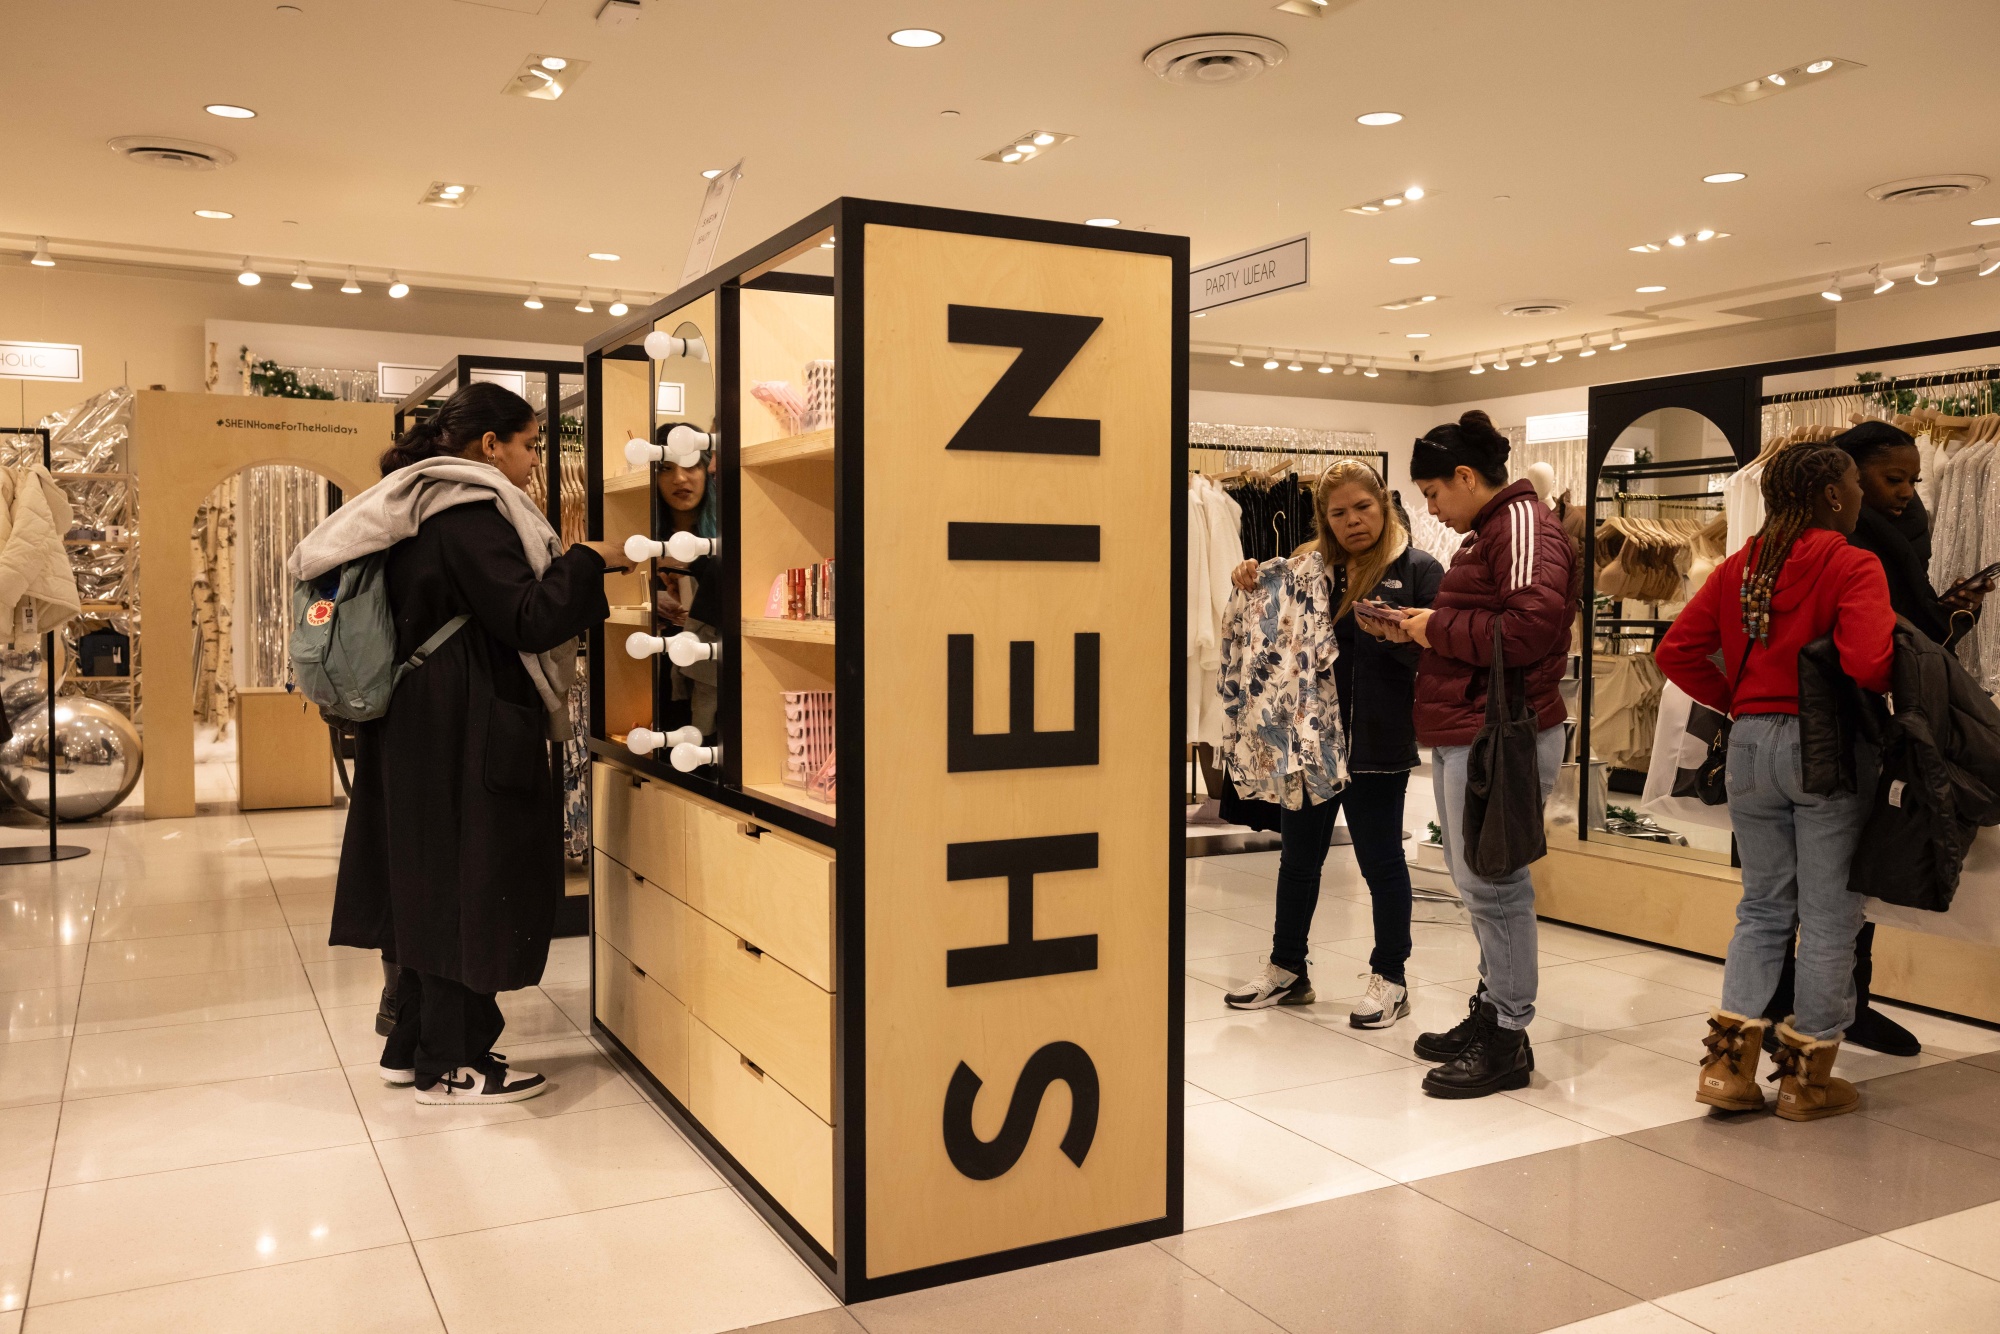 Shein in talks with banks and exchanges about U.S. IPO-sources